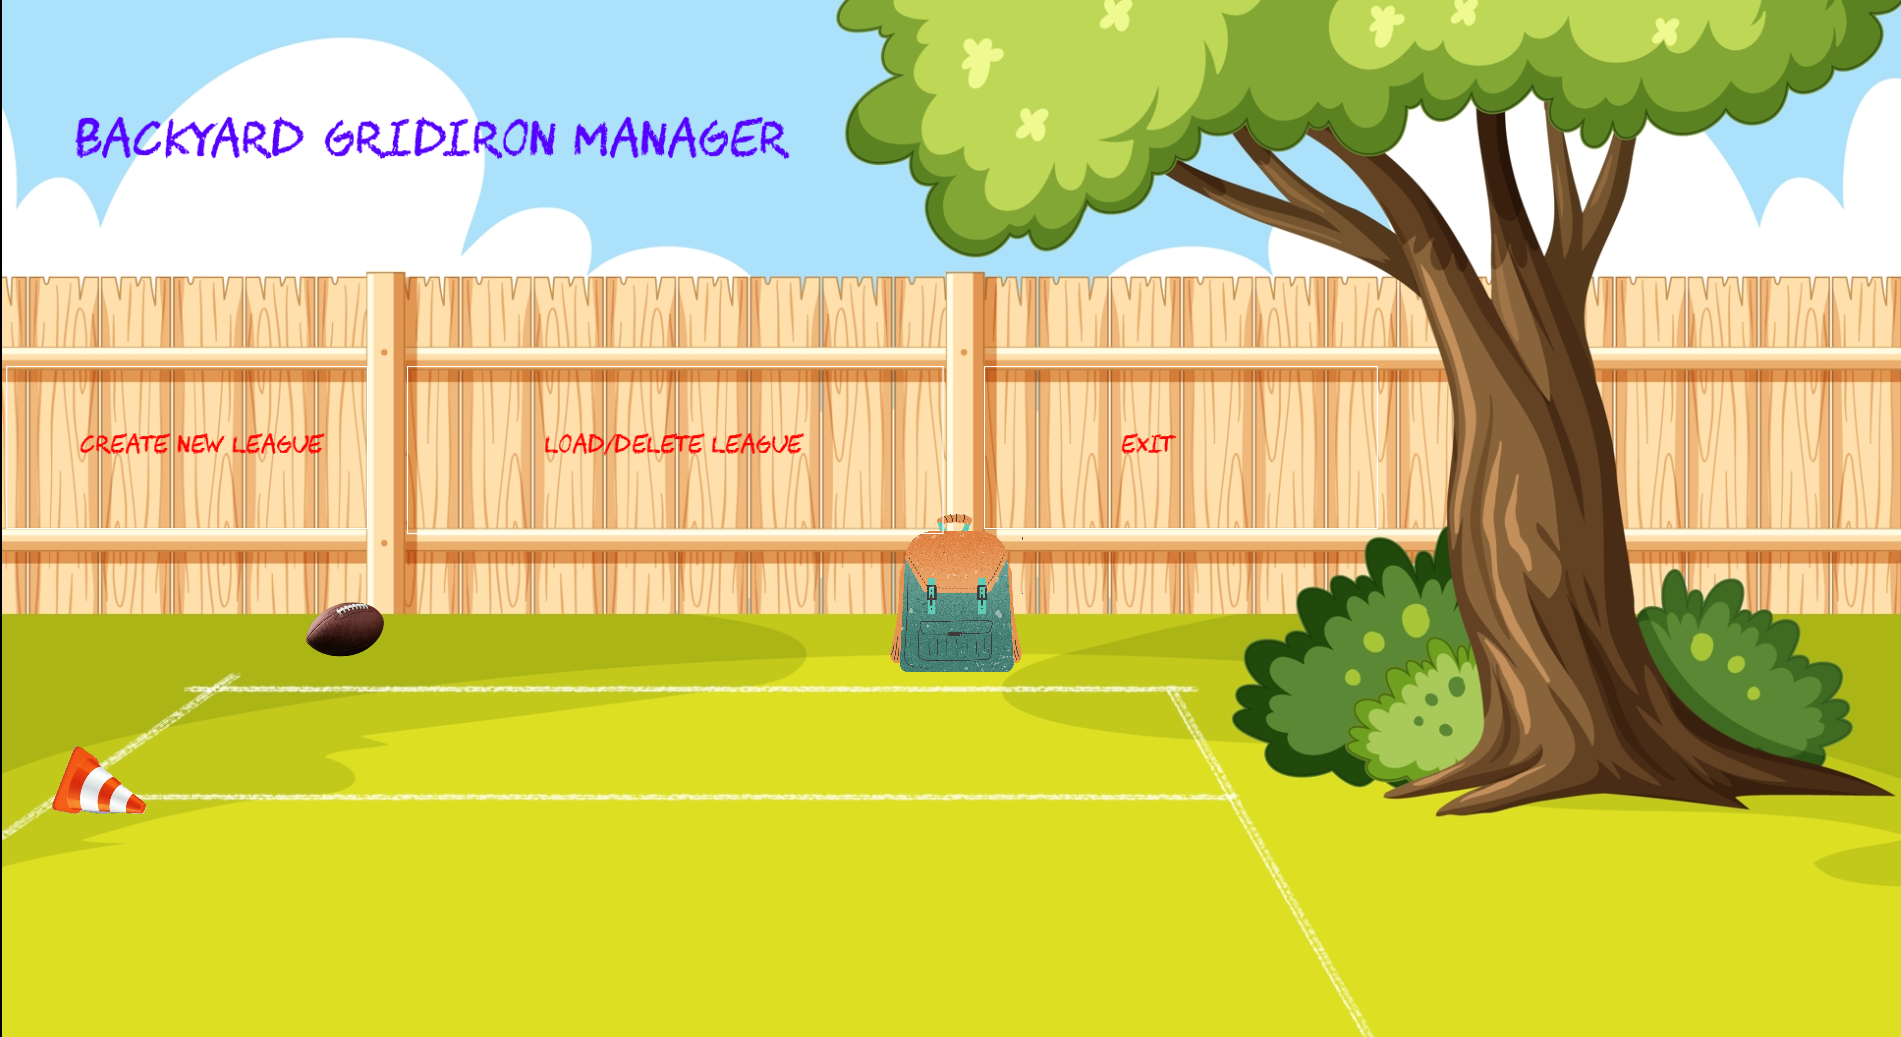 Backyard gridiron manager supporter pack